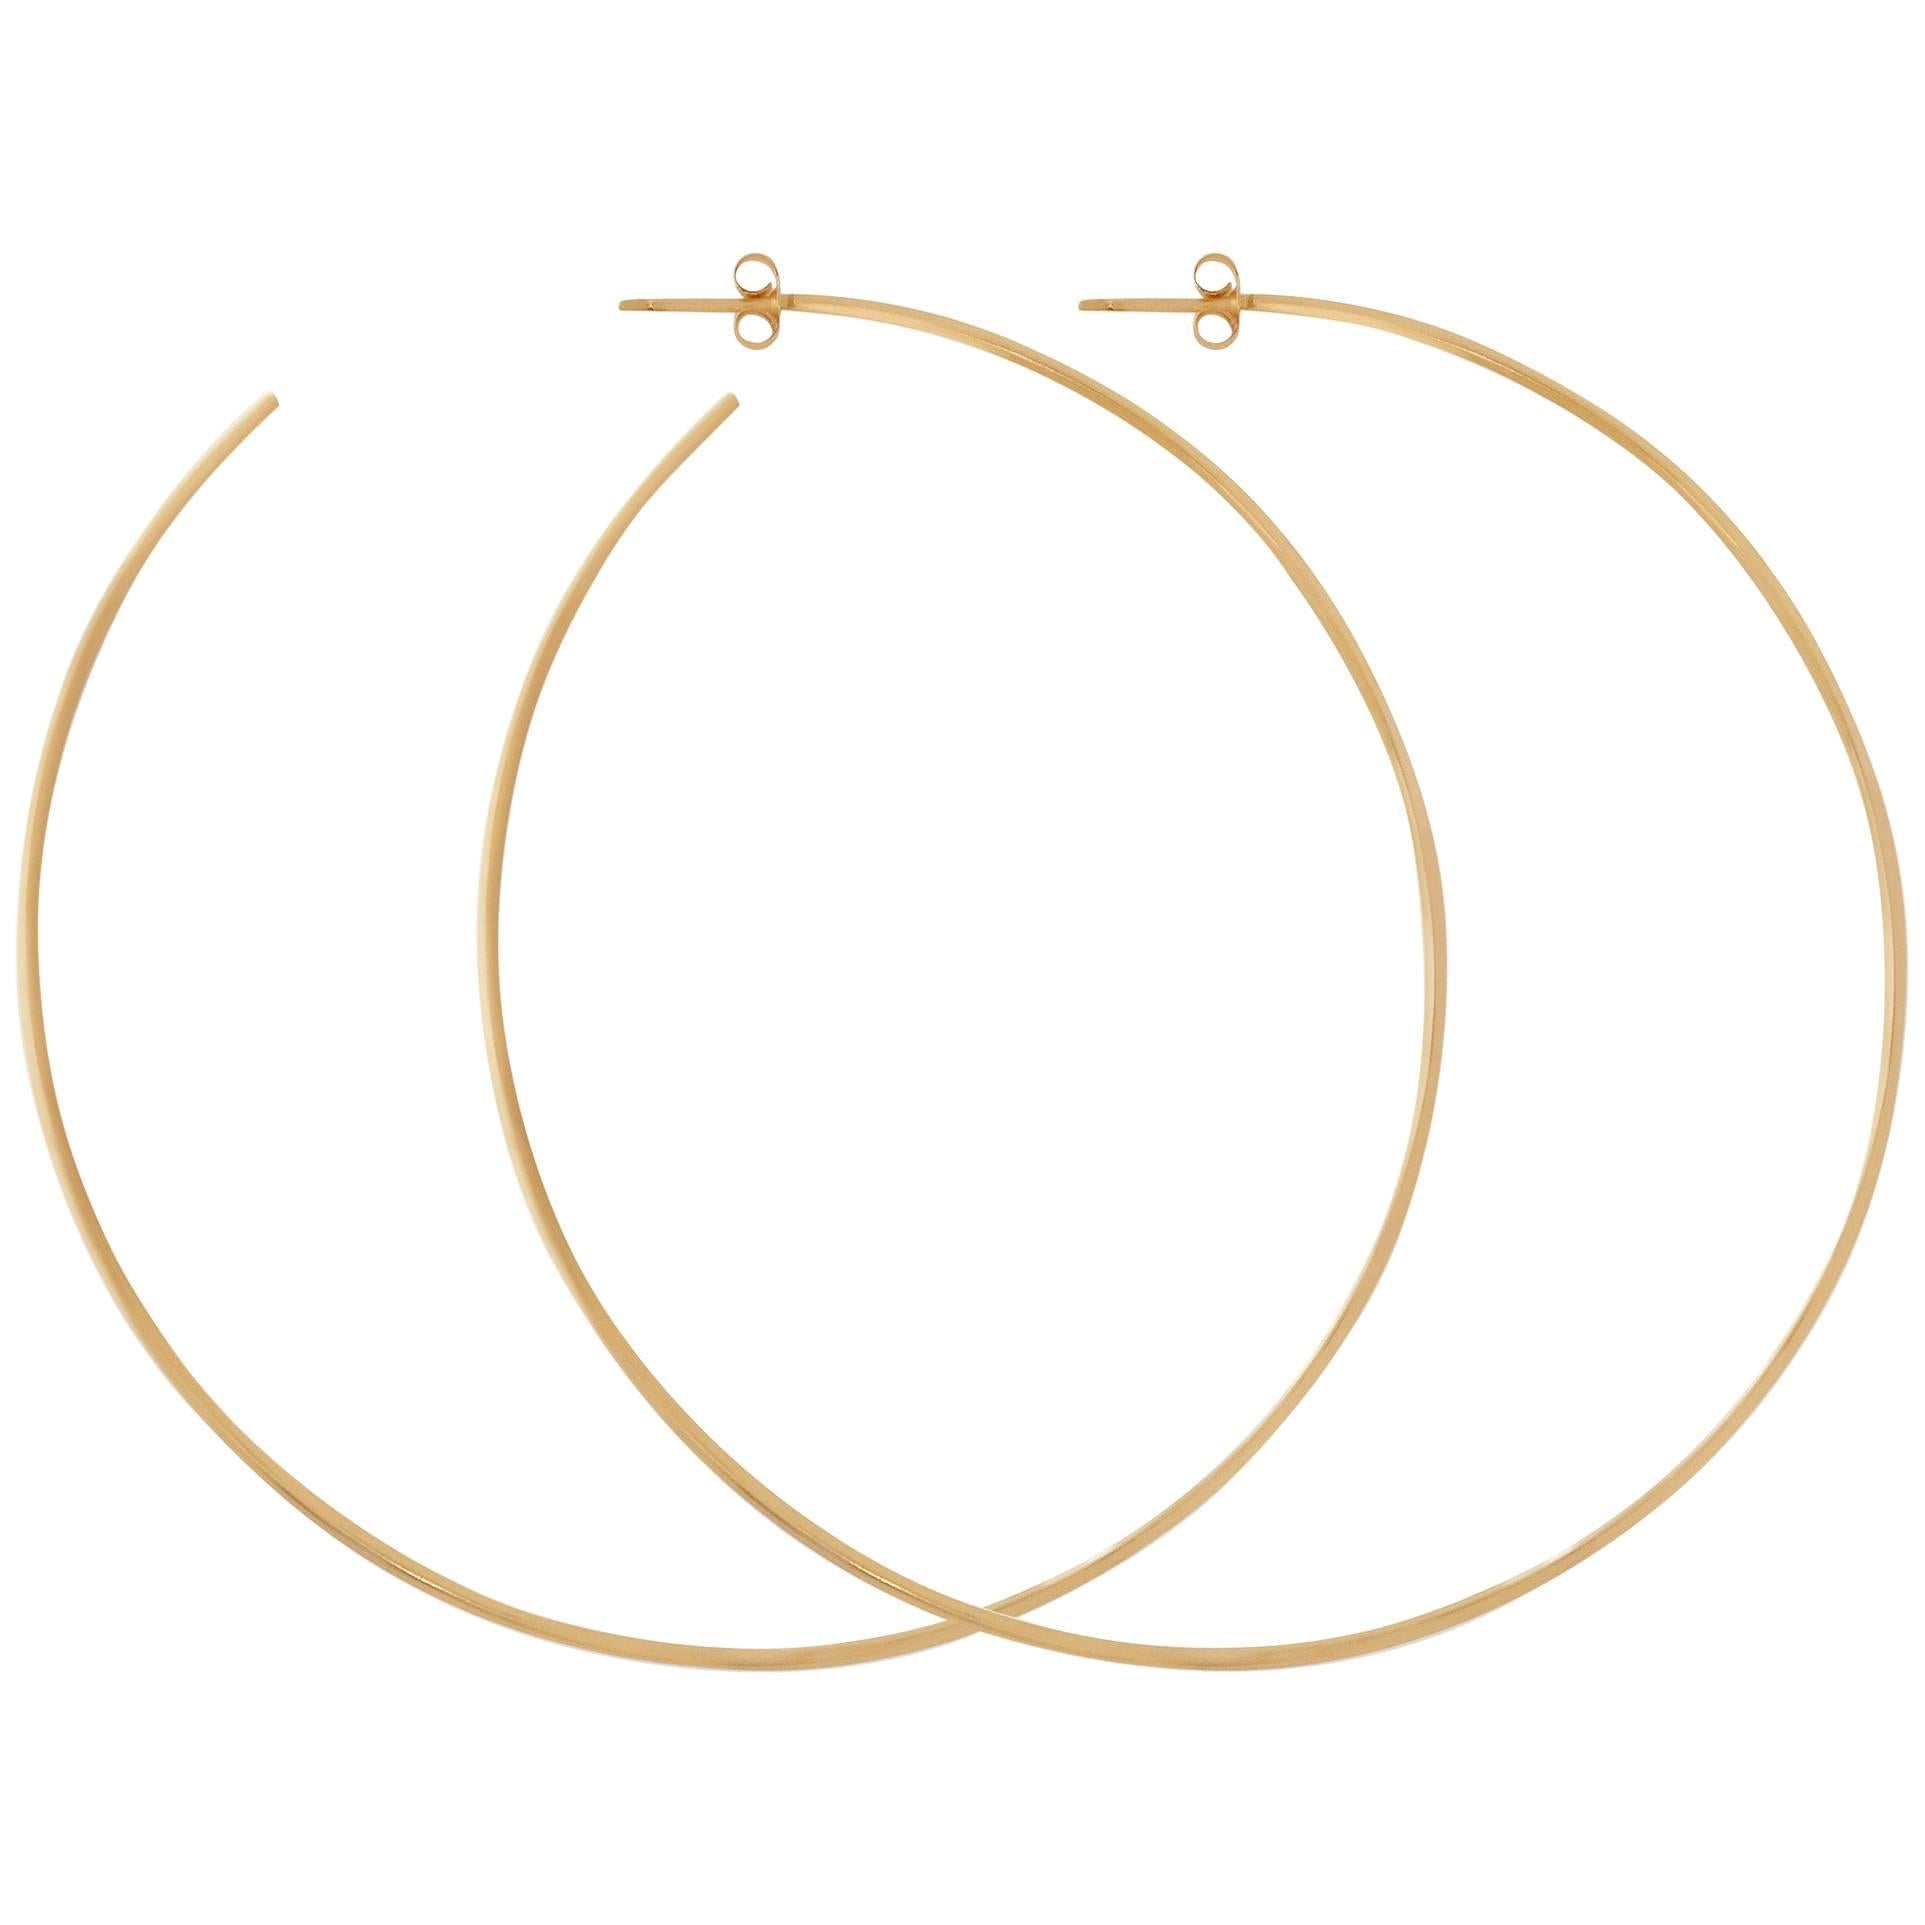 Extra Large Hoop Earrings in Yellow Gold by Allison Bryan